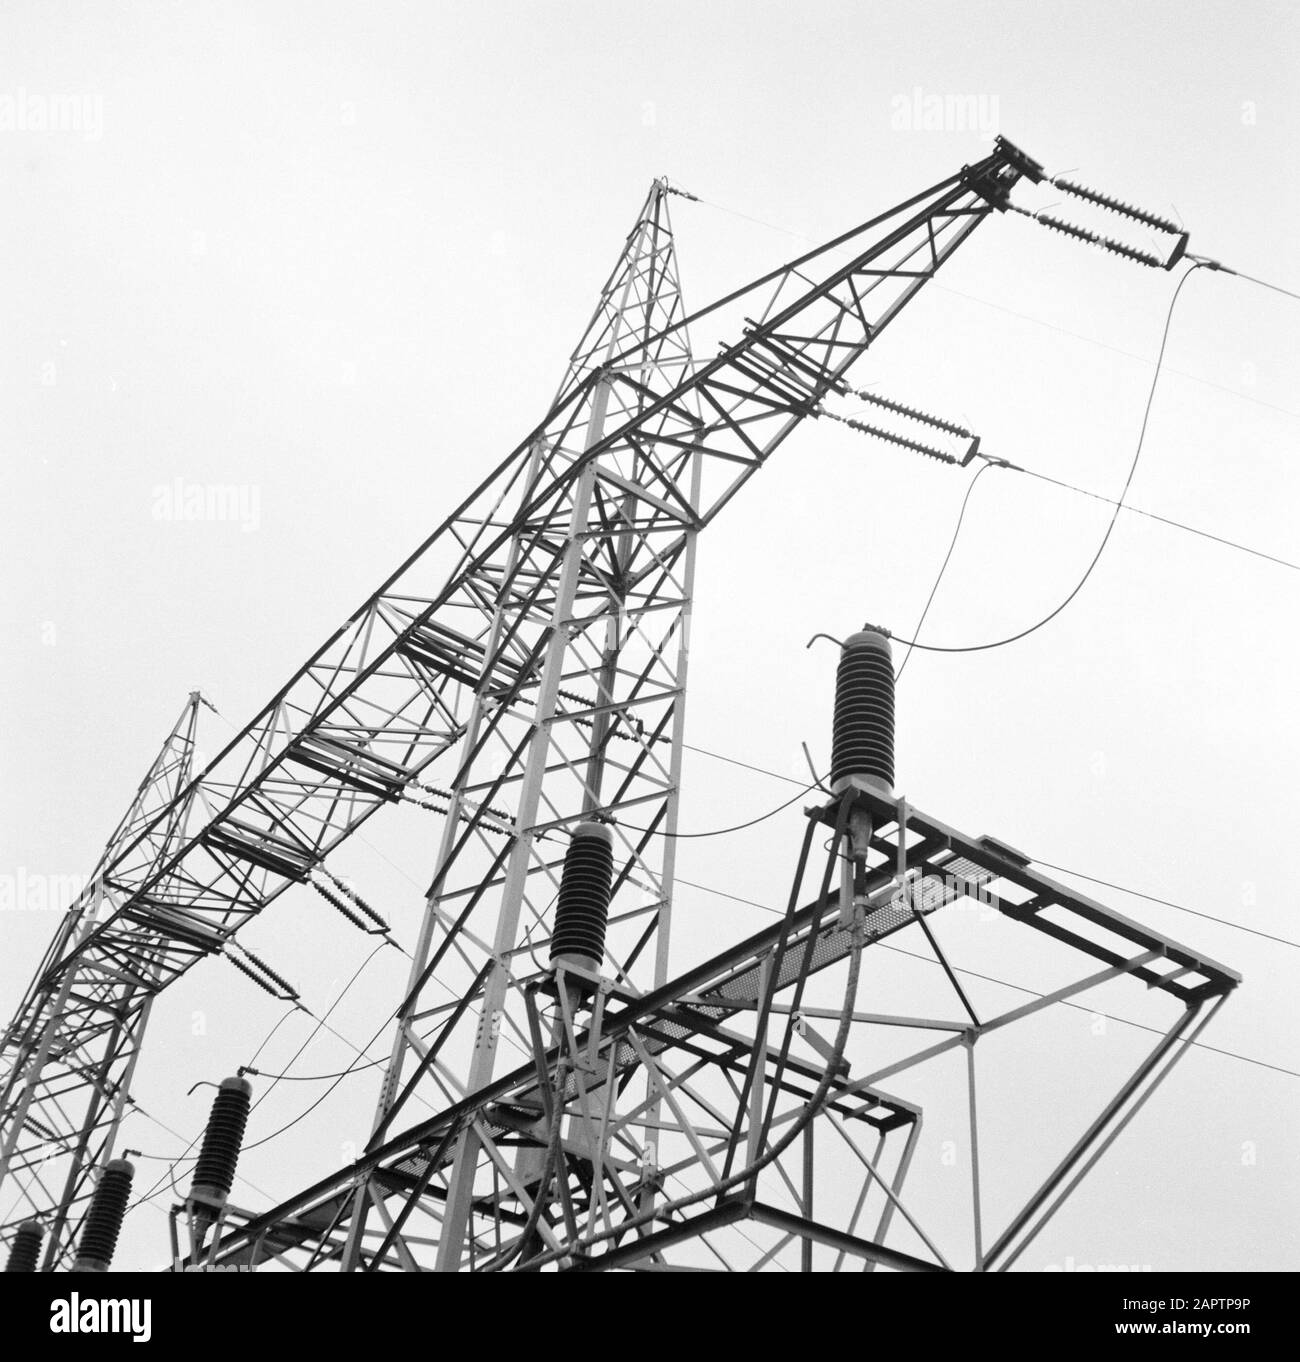 Rhine navigation, report from tug Damco 9: West Germany  High voltage mast with insulators and power lines near Koblenz Date: 1 April 1955 Location: Germany, Koblenz, West Germany Keywords: electricity, high voltage masts, landscapes Stock Photo